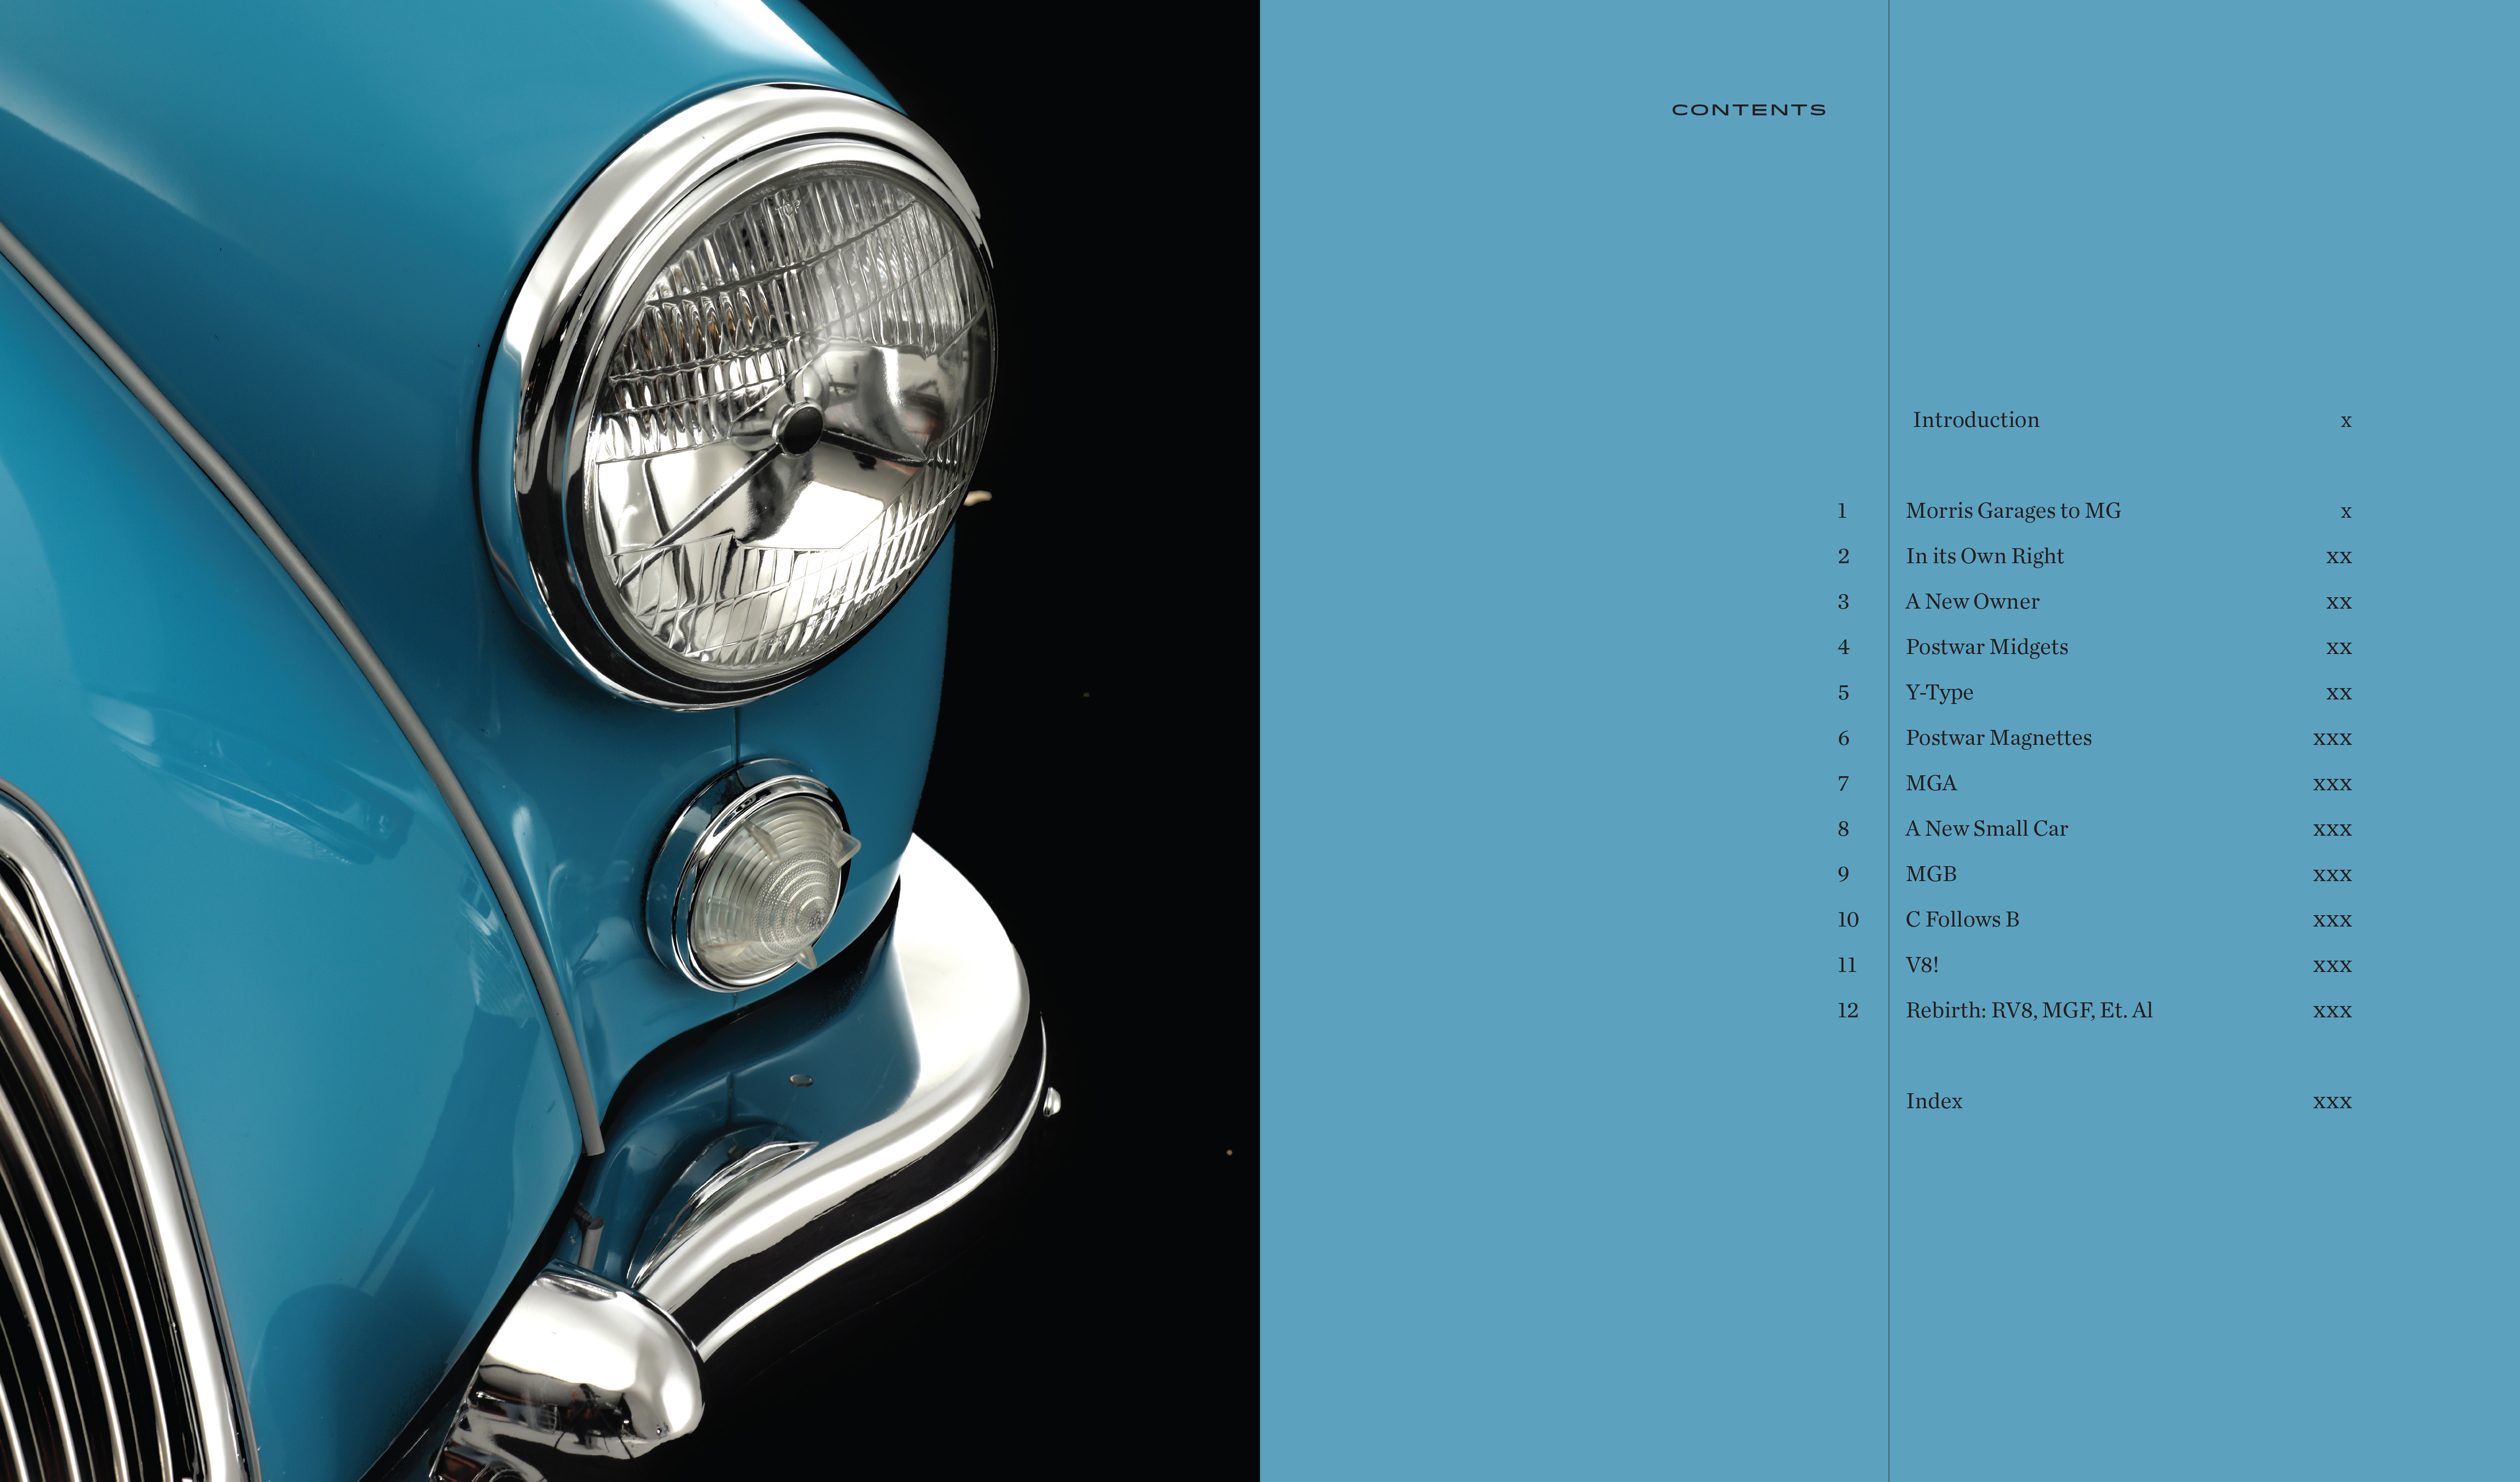 The Complete Book of Classic MG Cars